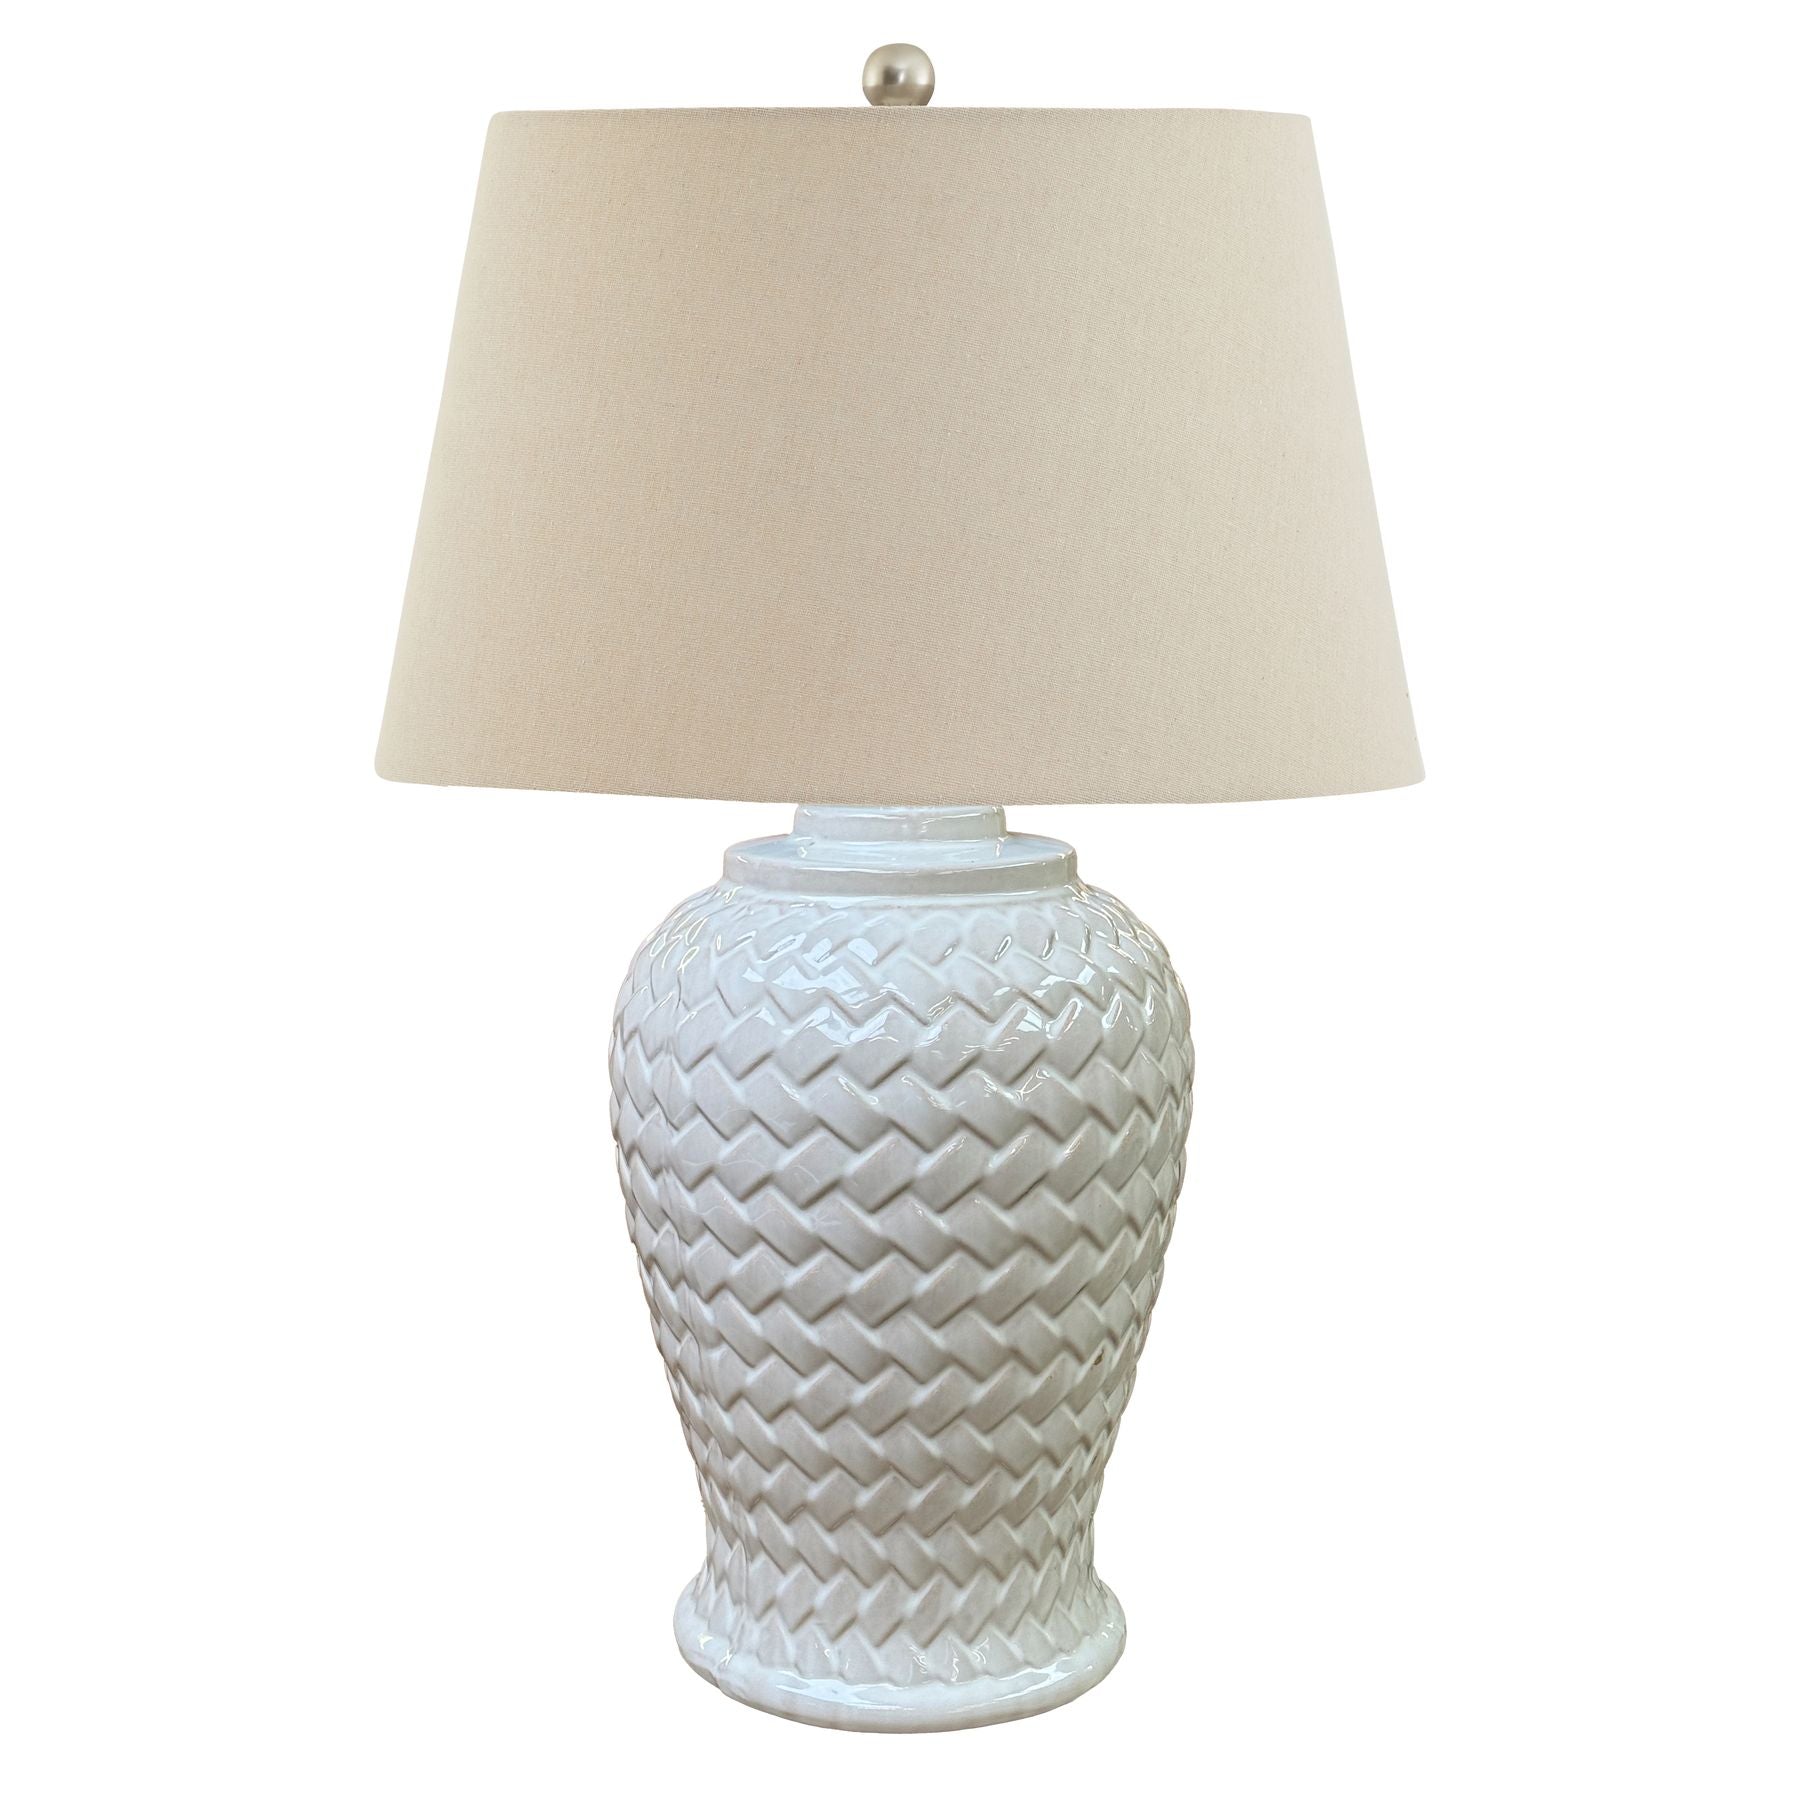 View Woven Ceramic Table Lamp With Linen Shade information